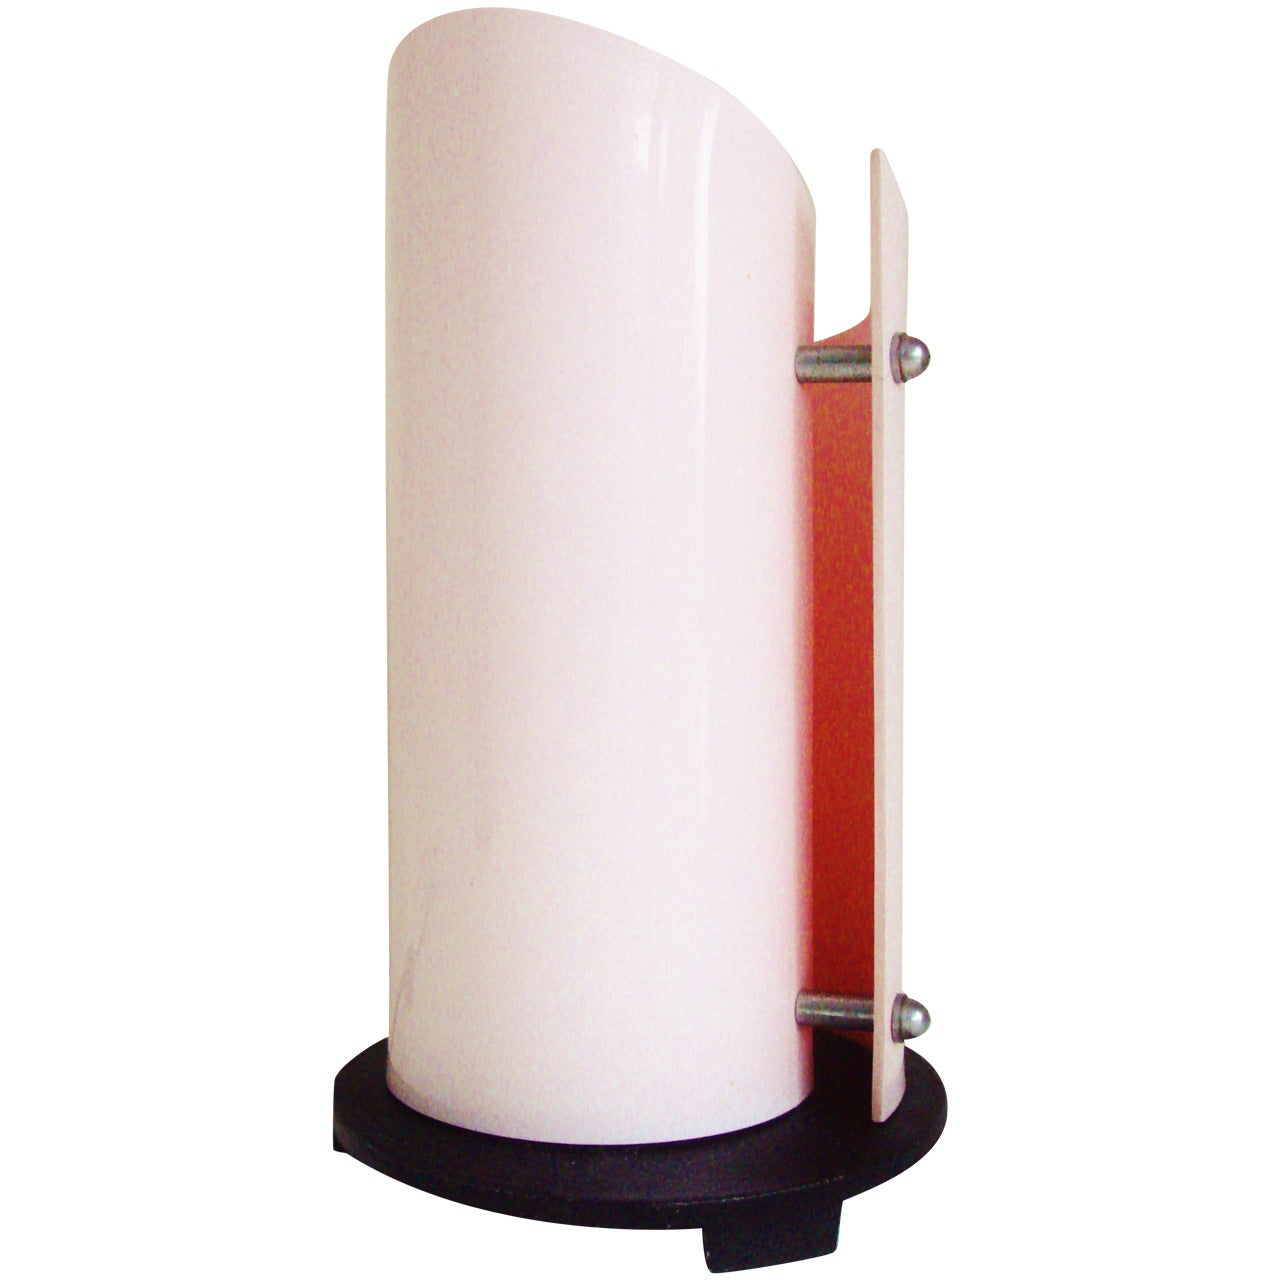 Stunning British Art Deco or Moderne Pink Lucite and Black Enamel Accent Lamp For Sale